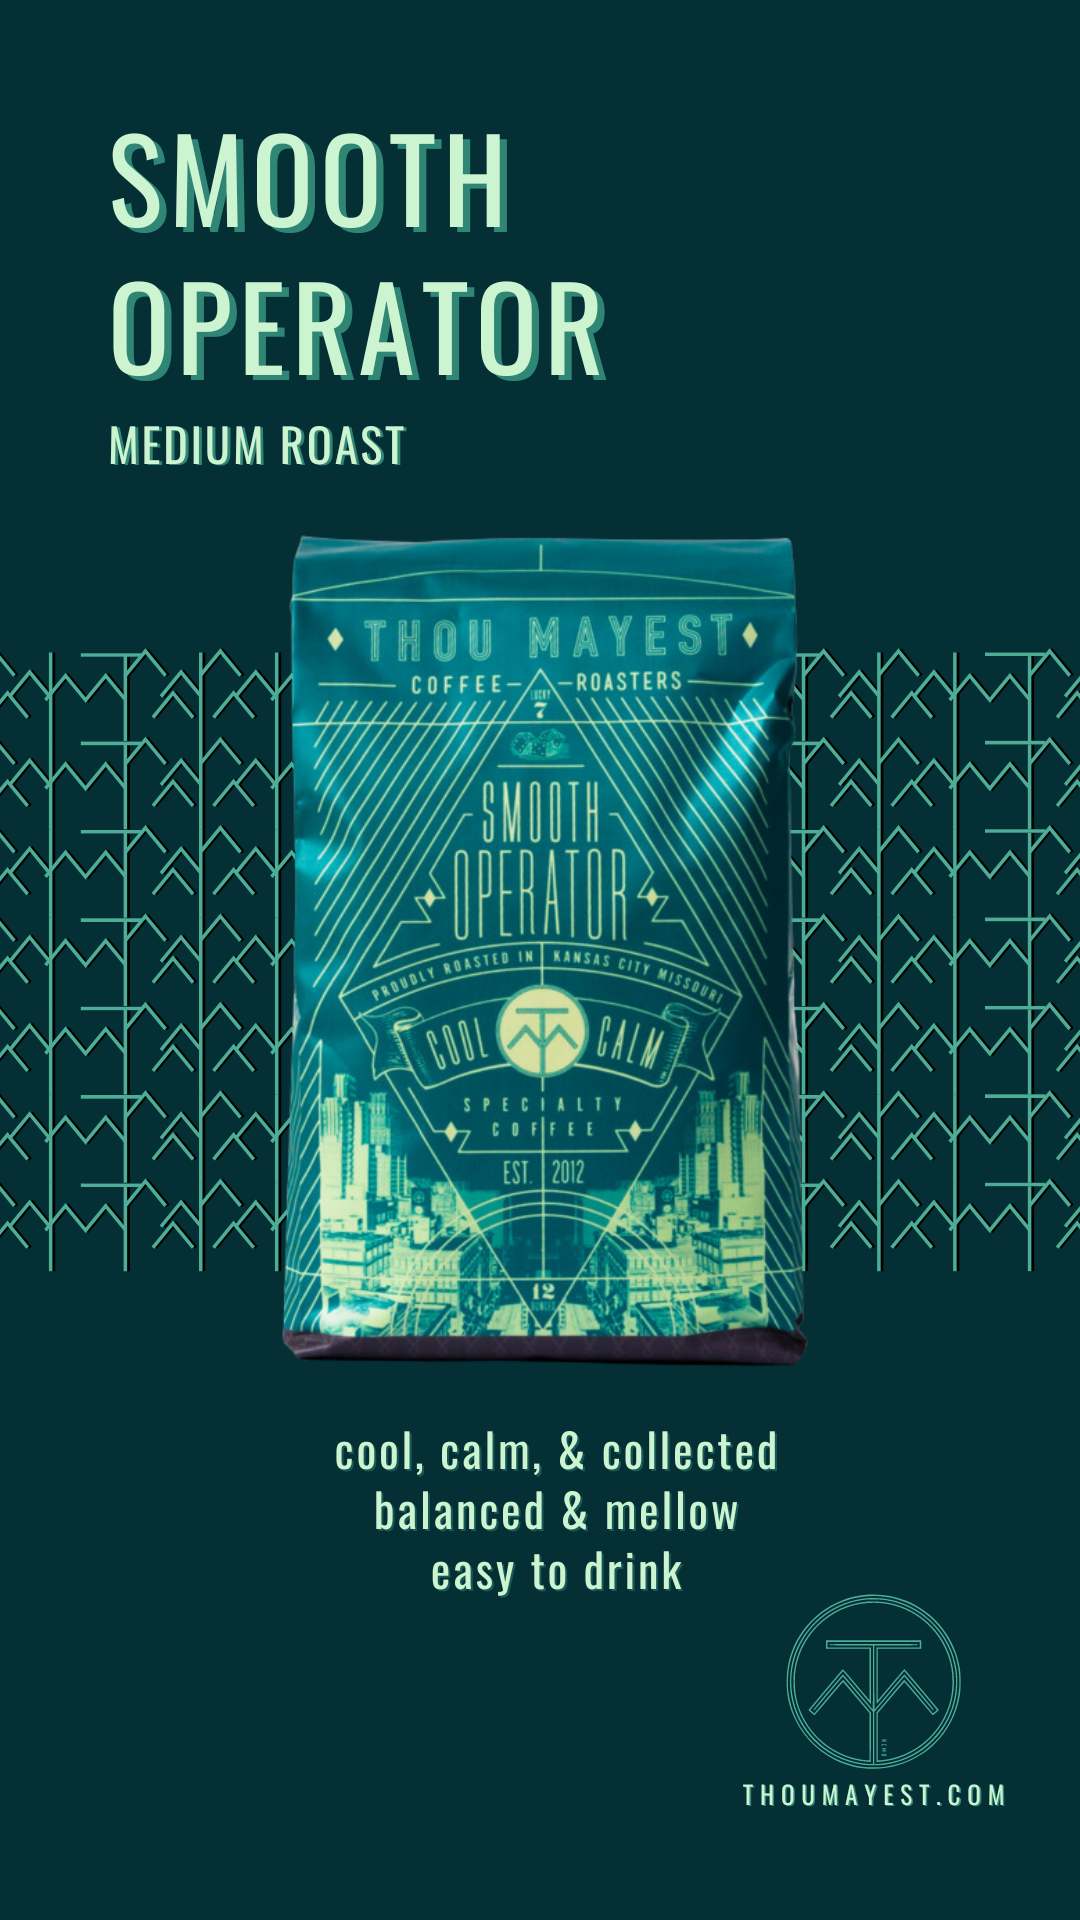 Image of our Smooth Operator coffee bag with description - medium roast, cool, calm & collected, balanced & mellow, easy to drink. Click the image to view the product page.